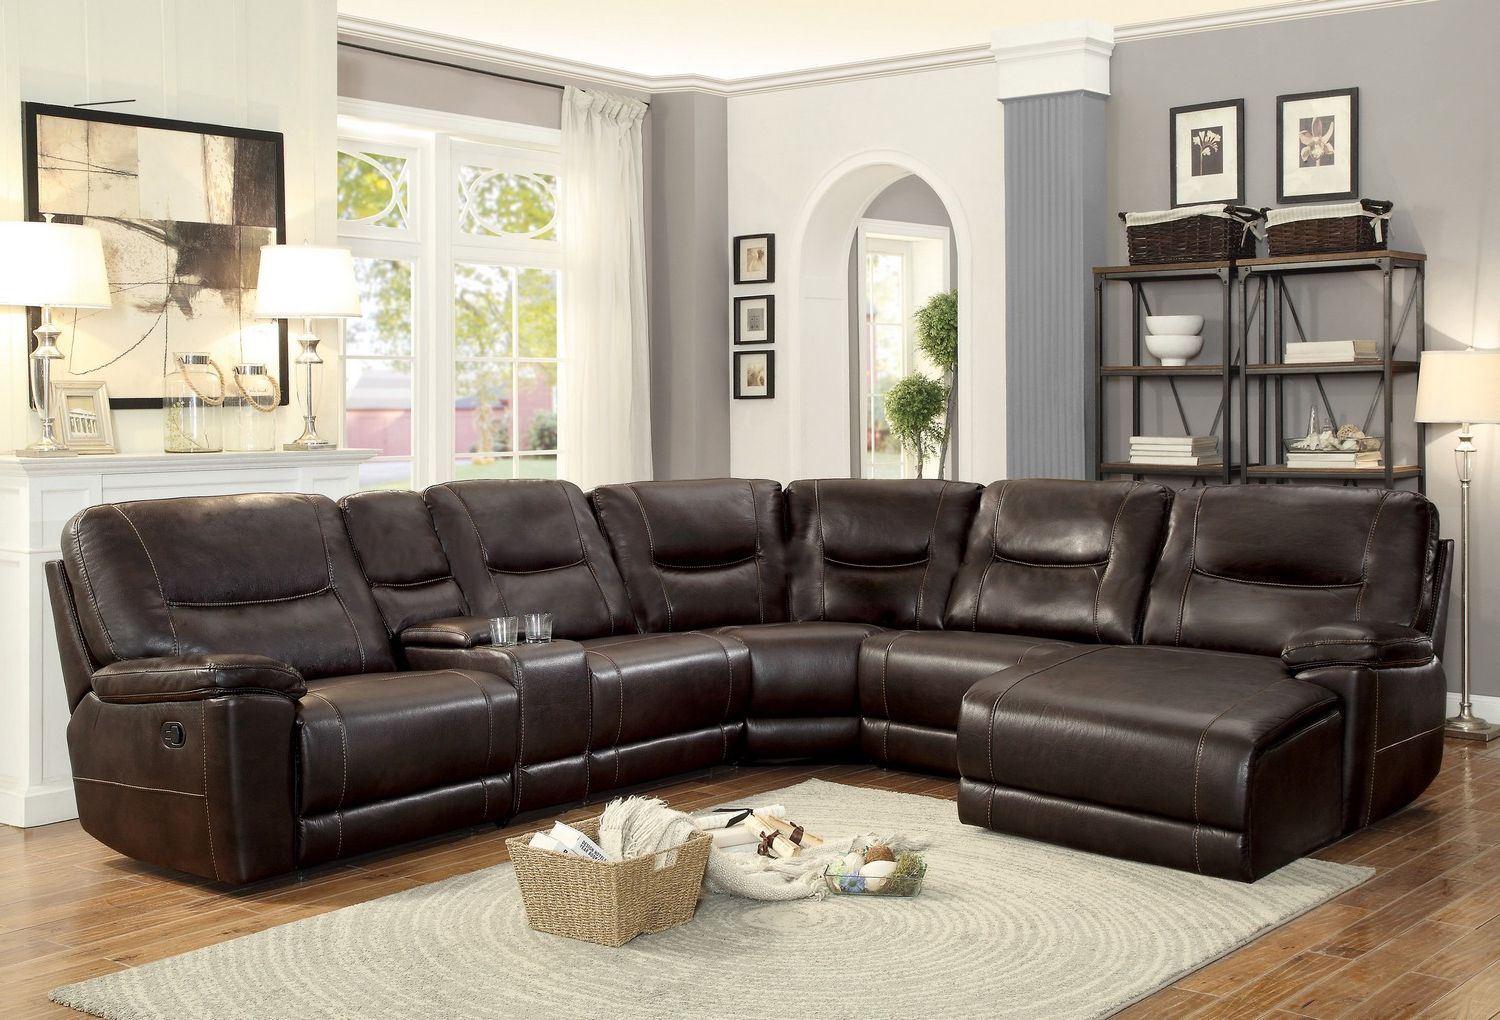 Homelegance Columbus Reclining Sectional Sofa Set B – Breathable Faux Inside Faux Leather Sectional Sofa Sets (View 6 of 20)